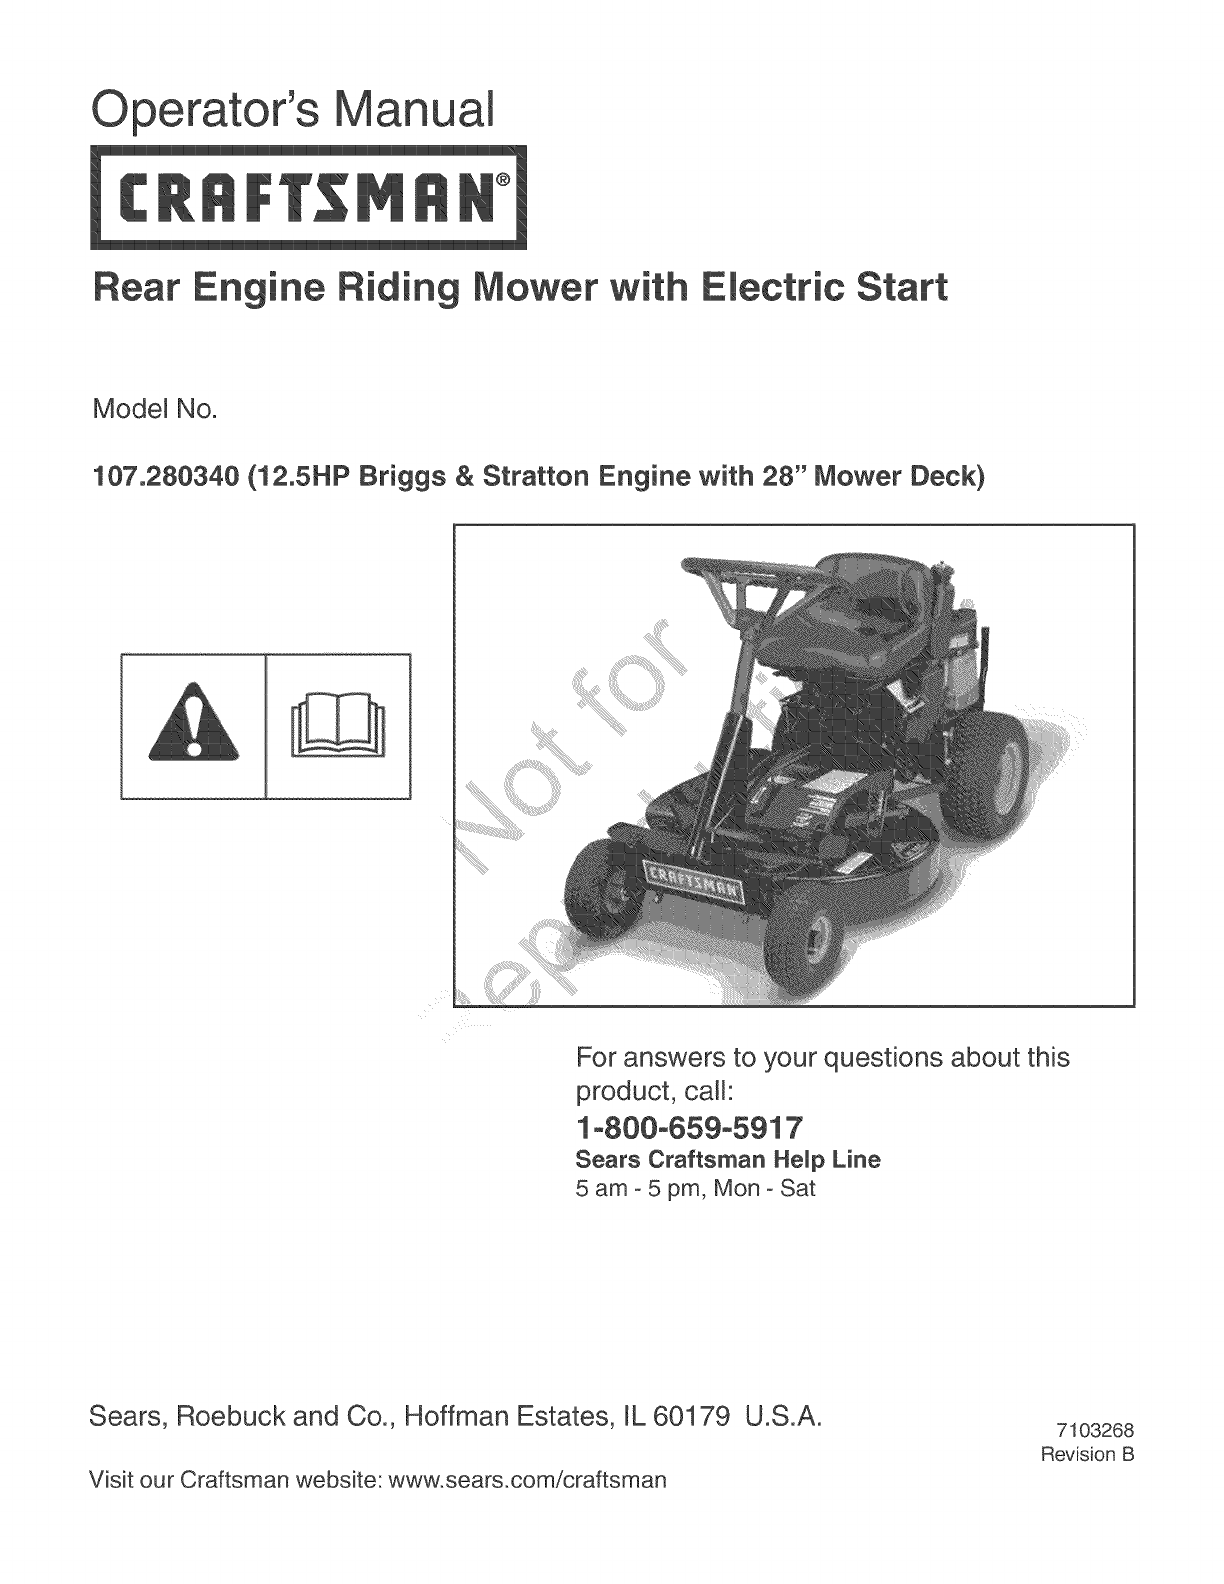 Craftsman 107280340 User Manual LAWN MOWER Manuals And Guides L1005438